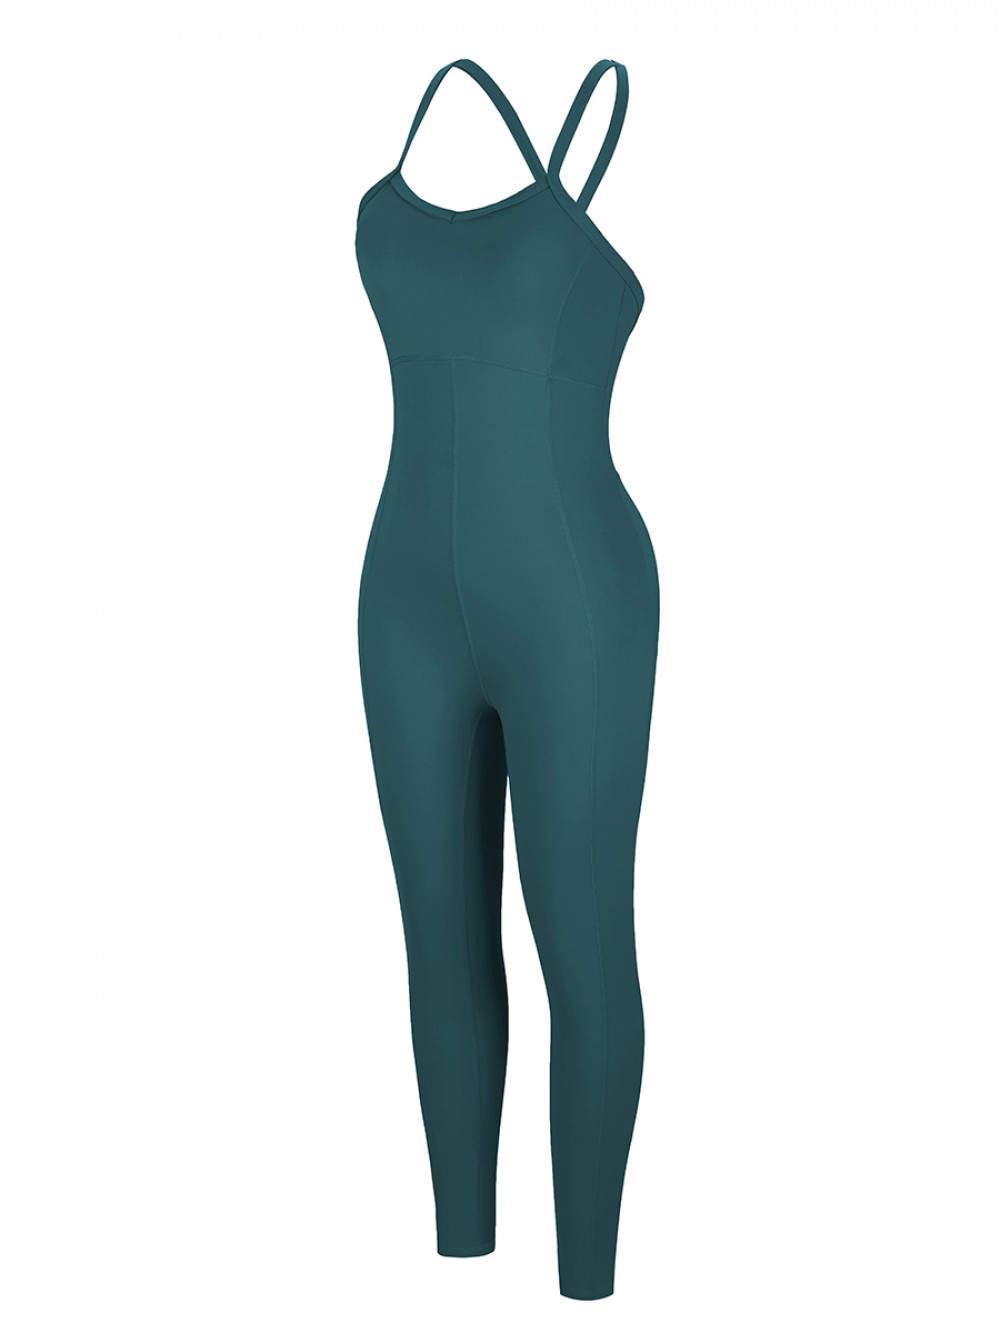 Blue Cross Back Pleated Sling Athletic Jumpsuit For Fitness